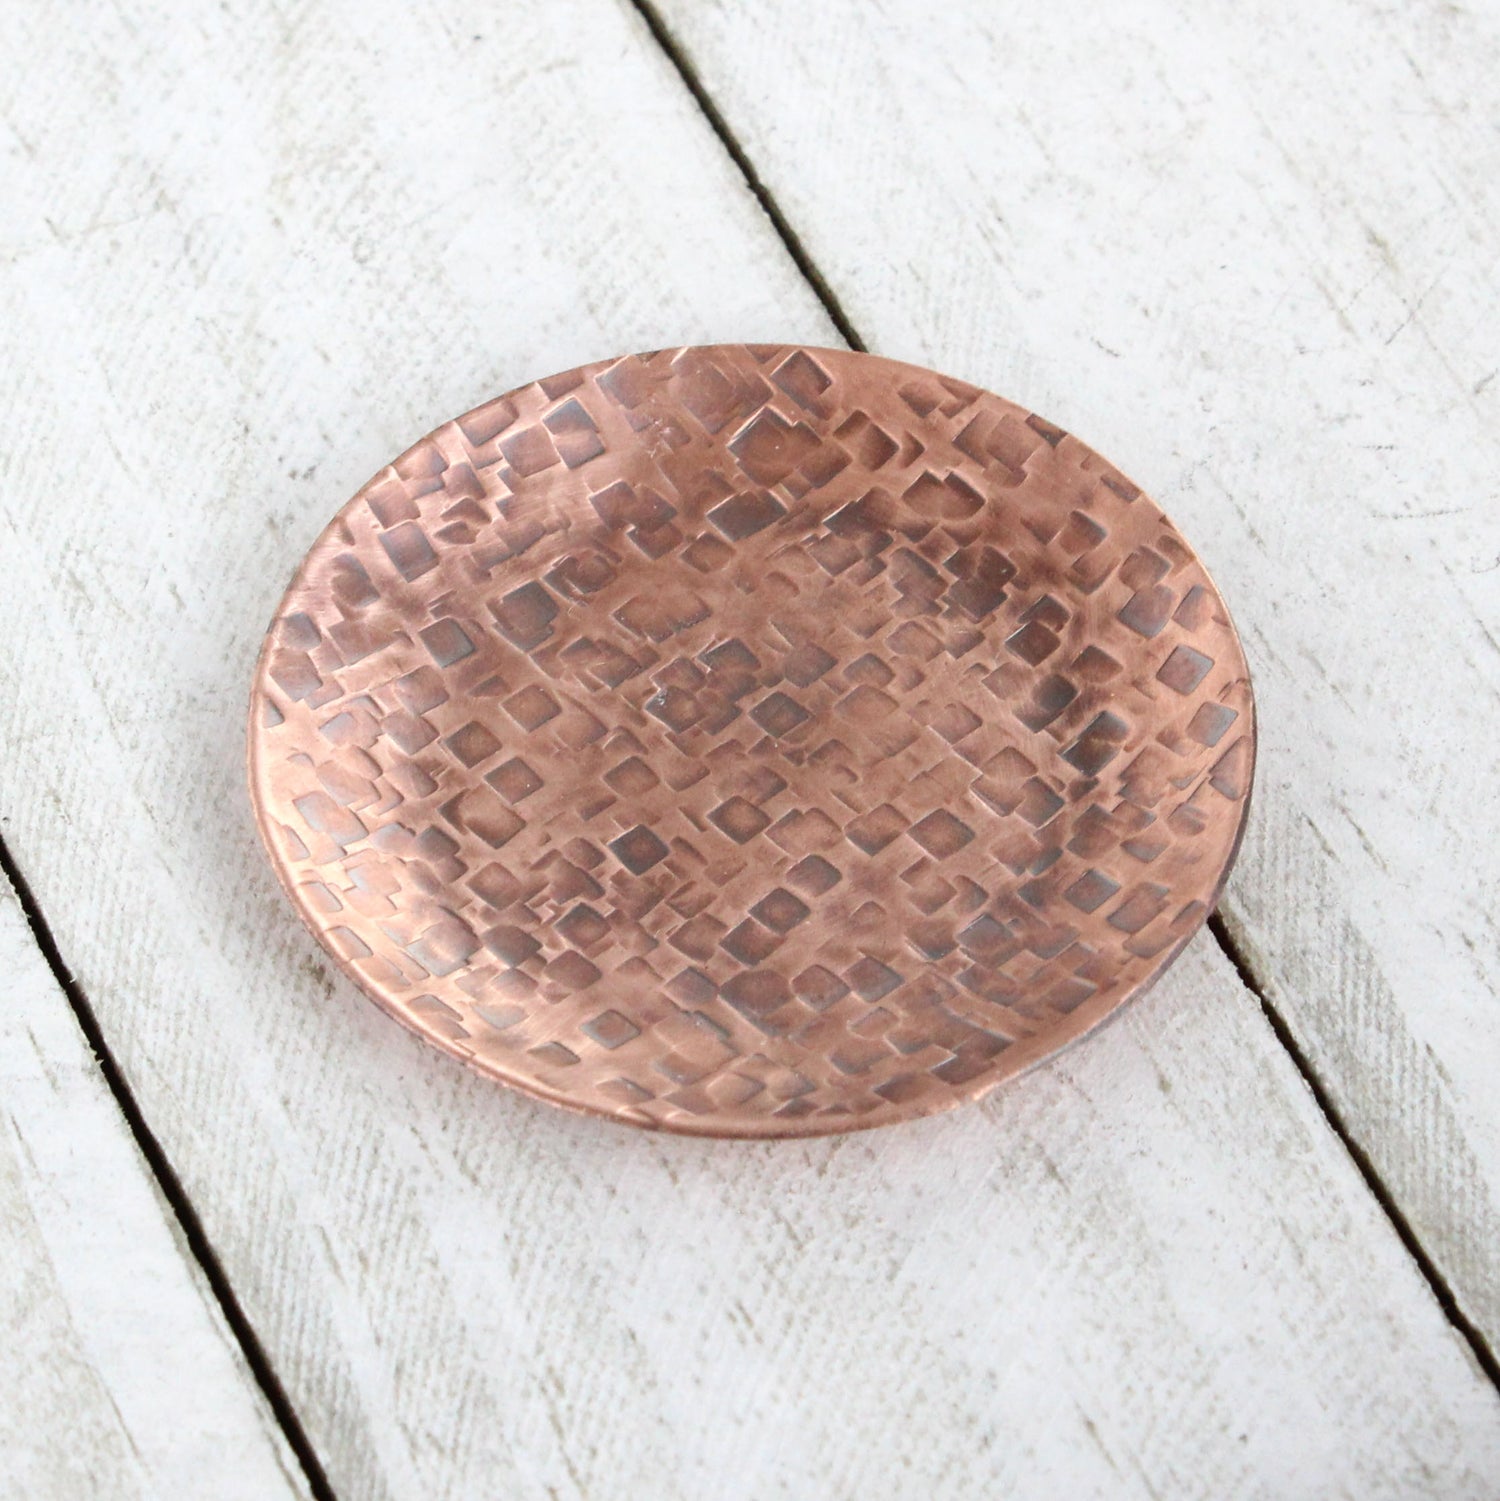 Small copper ring dish for rings, jewelry, and trinkets. Hammered texture pattern, the pattern is random small squares. Slightly raised edges form a shallow bowl.